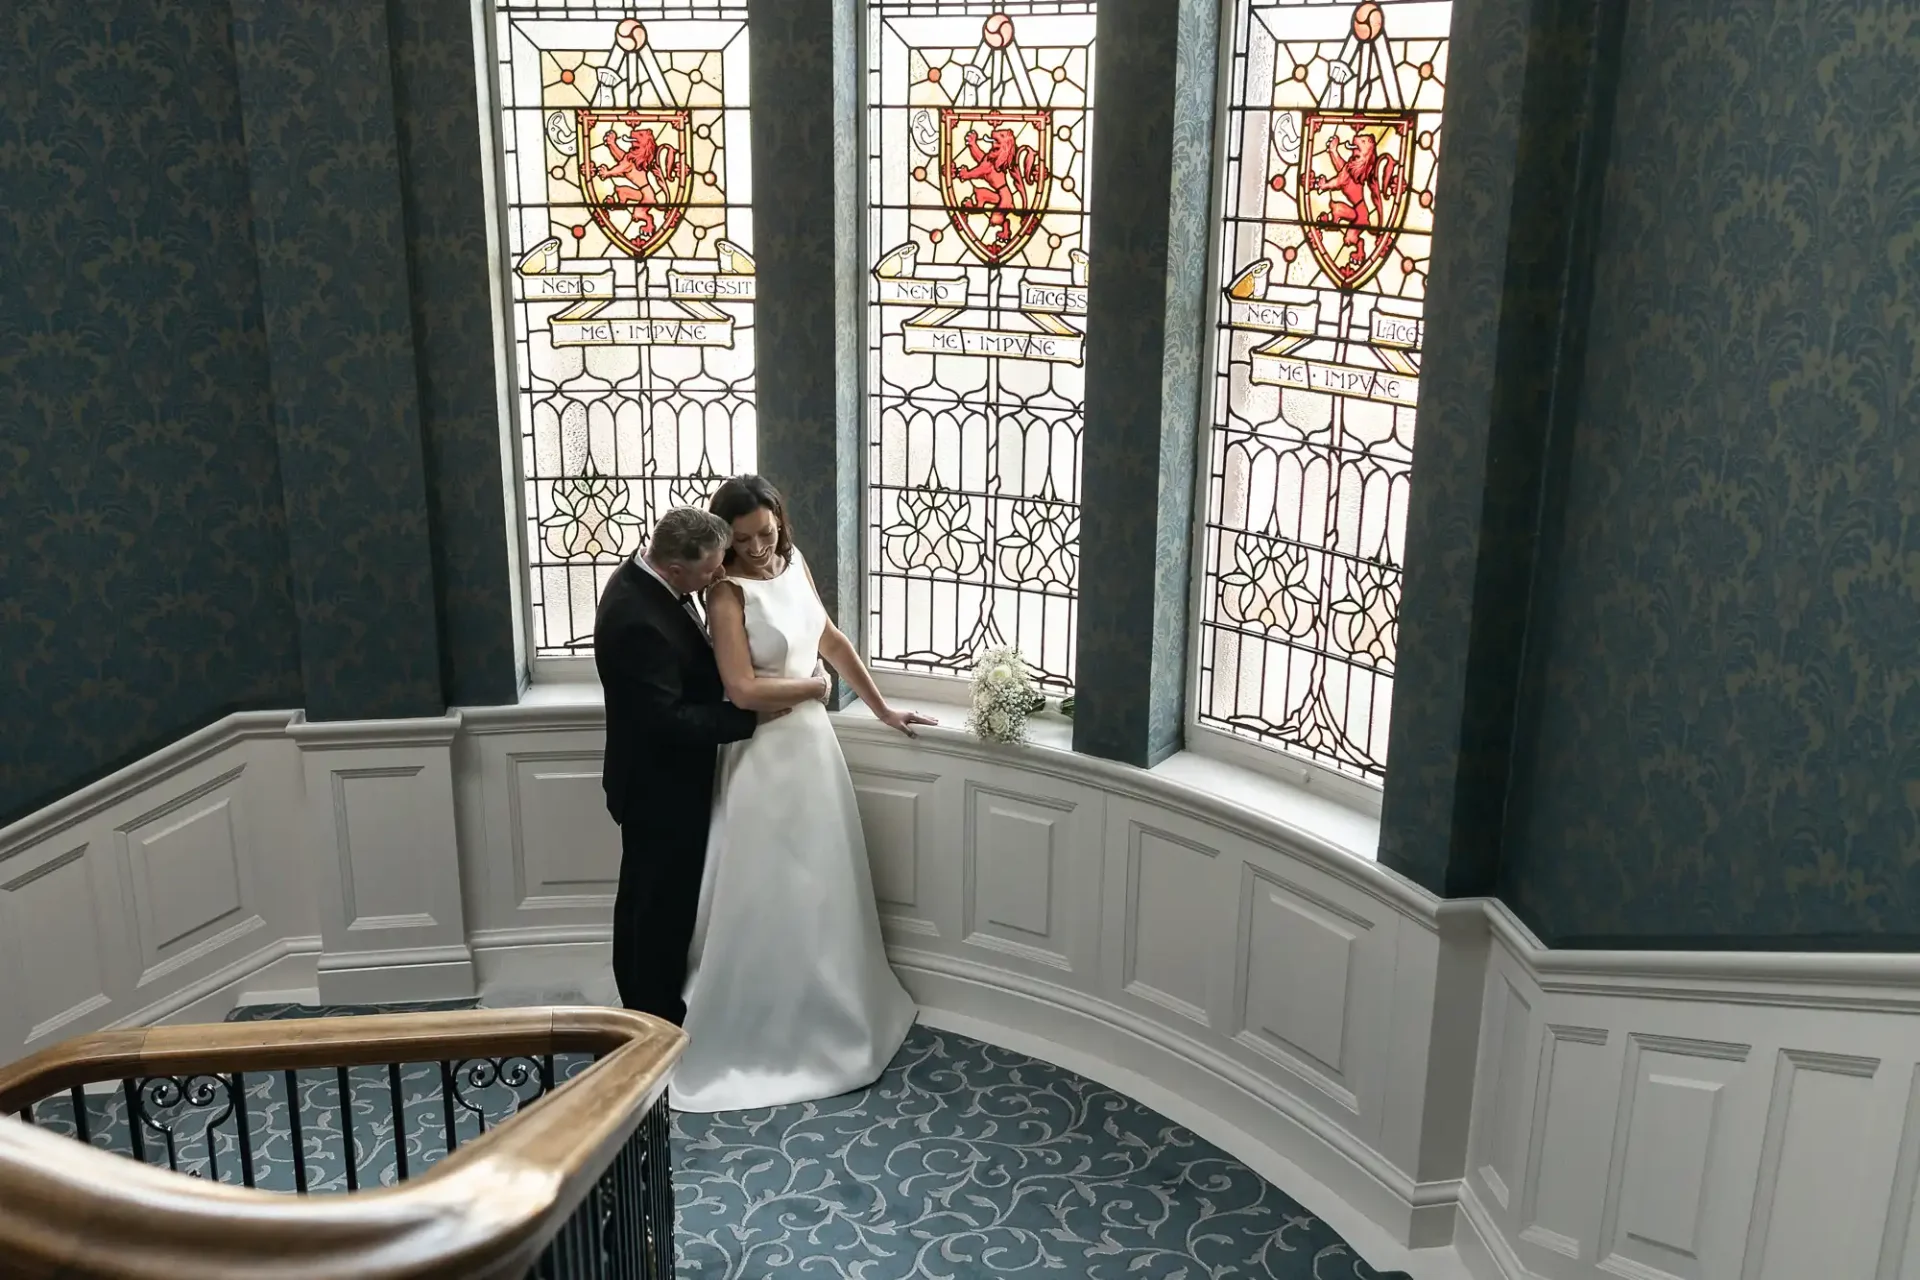 A bride and groom embrace on a staircase with ornate stained-glass windows in the background.